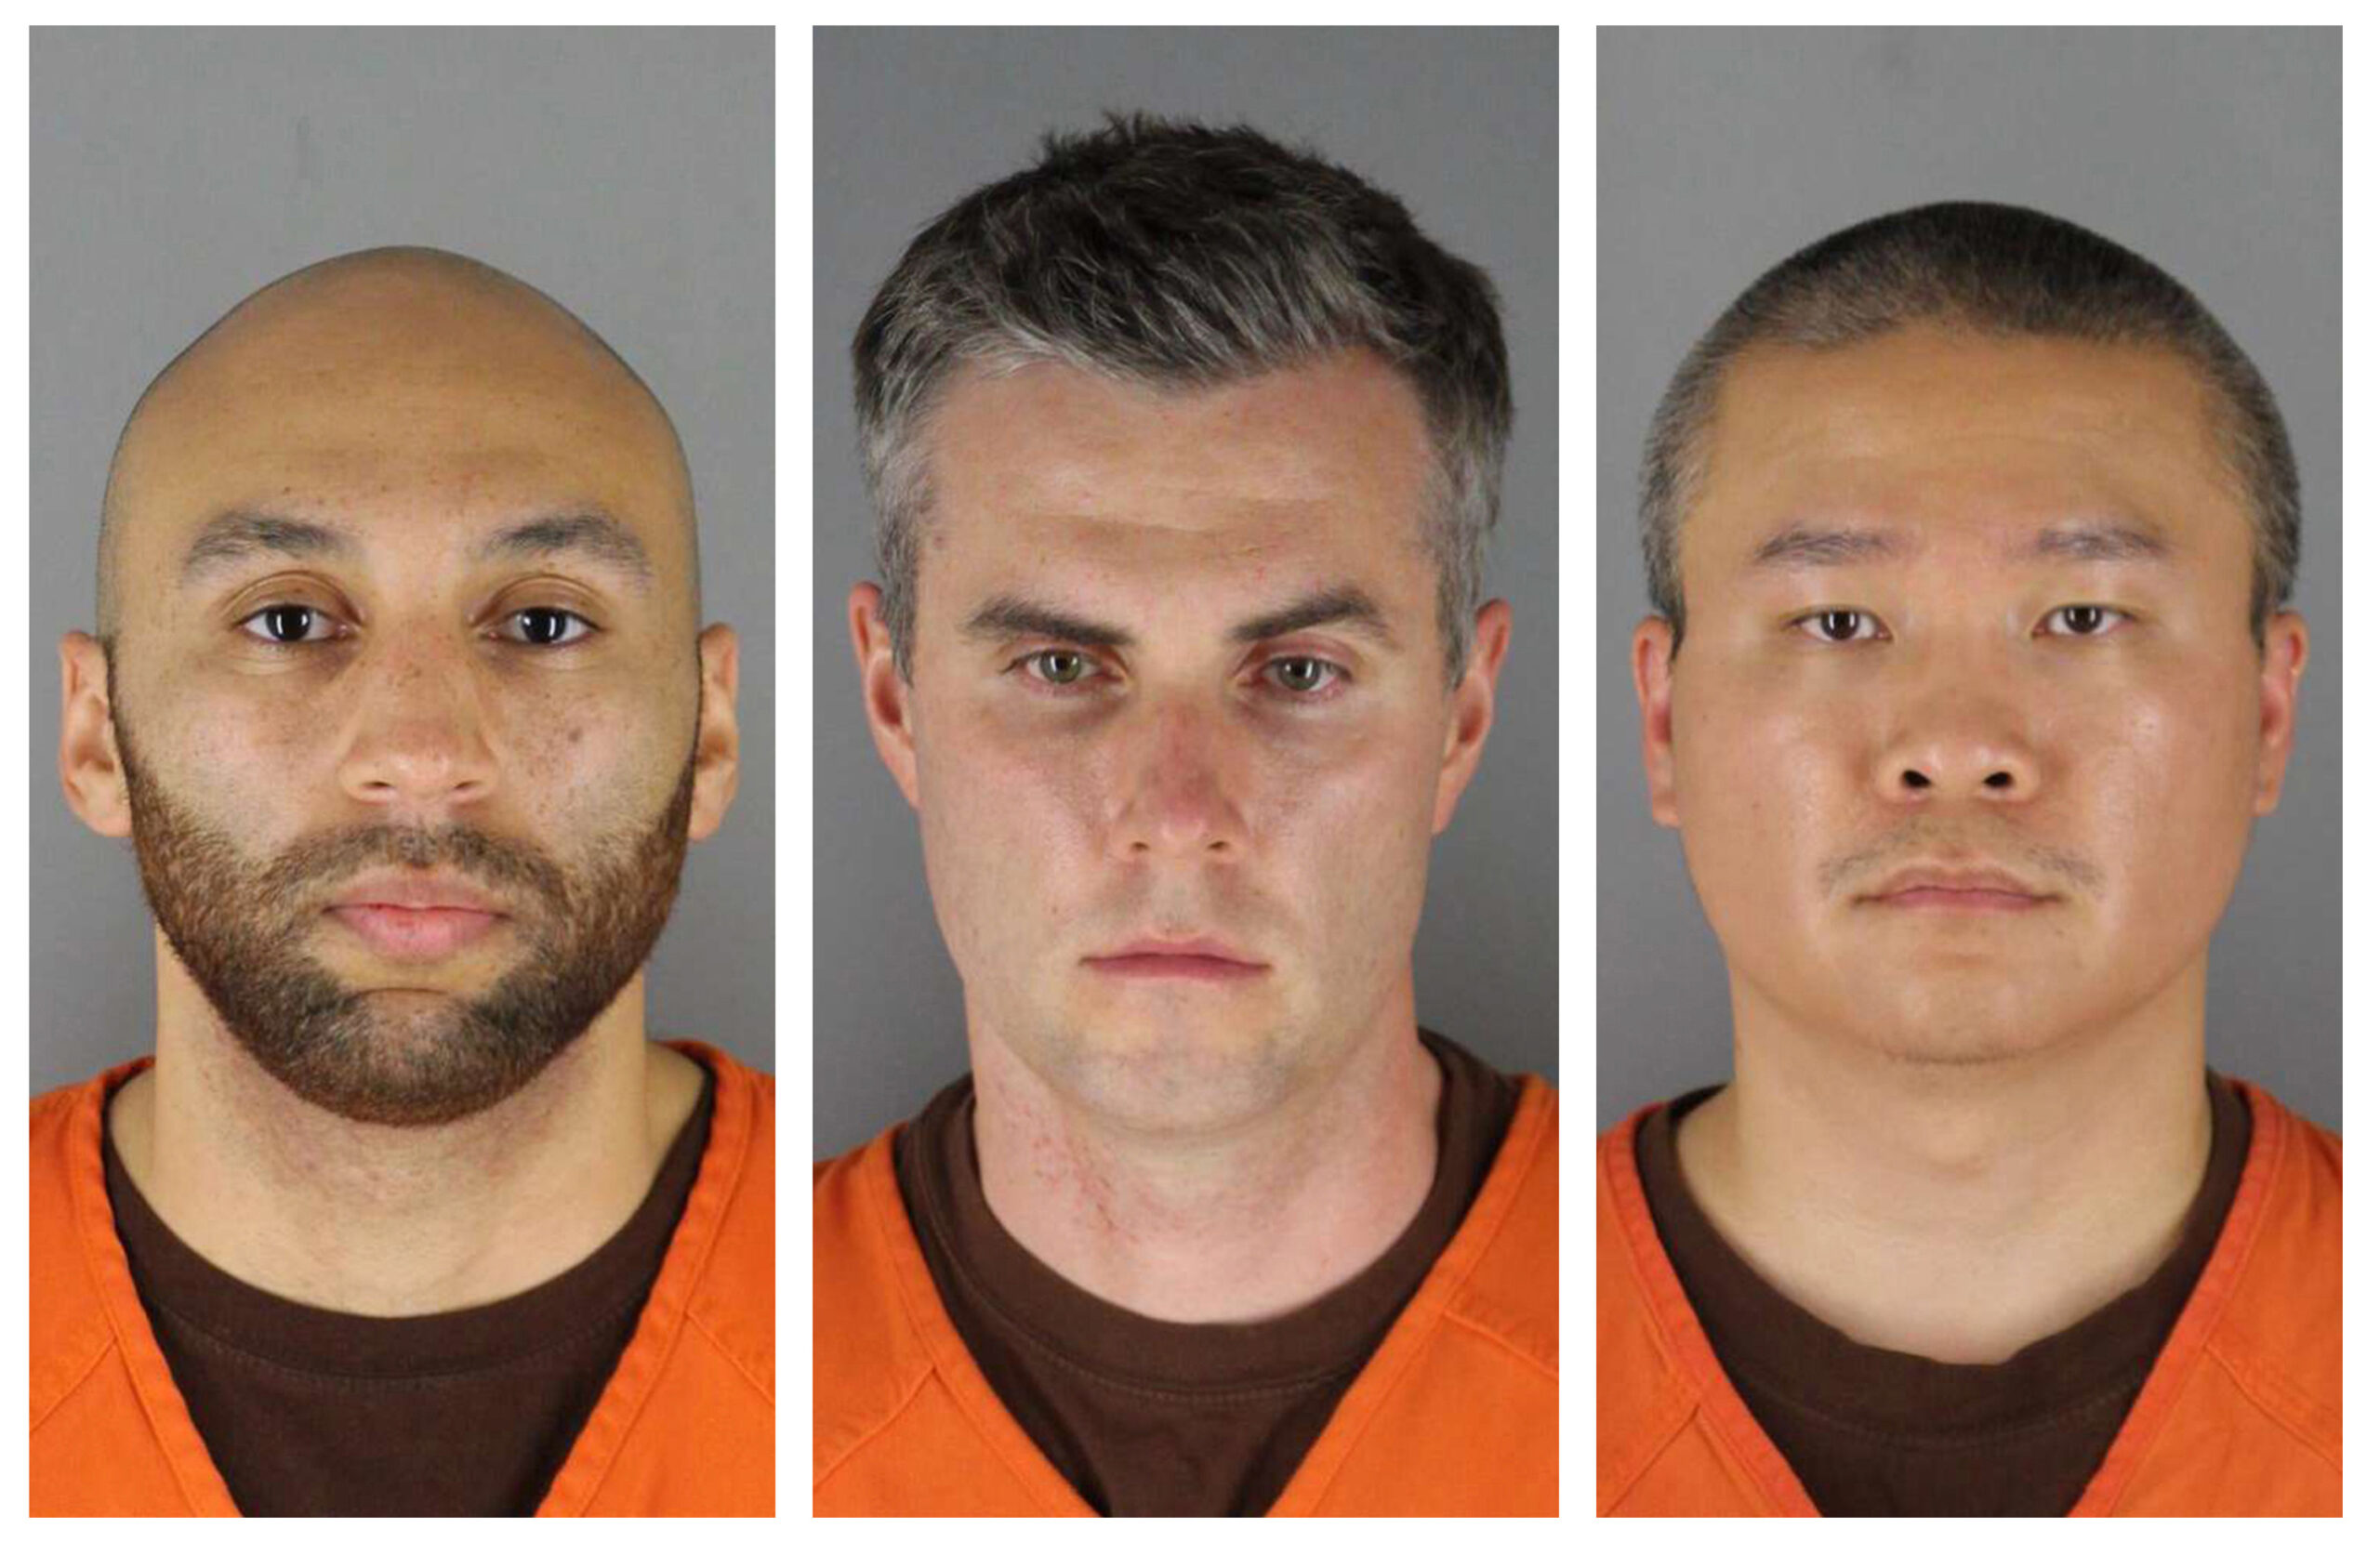 FILE - This combination of photos provided by the Hennepin County Sheriff's Office in Minnesota on June 3, 2020, shows, from left, former Minneapolis police officers J. Alexander Kueng, Thomas Lane and Tou Thao. The former policer officers are on trial in federal court accused of violating Floyd's civil rights as fellow Officer Derek Chauvin killed him. Judge Paul Magnuson abruptly recessed on Wednesday, Feb. 2, 2022 after one of the defendants tested positive for COVID-19. (Hennepin County Sheriff's Office via AP, File)